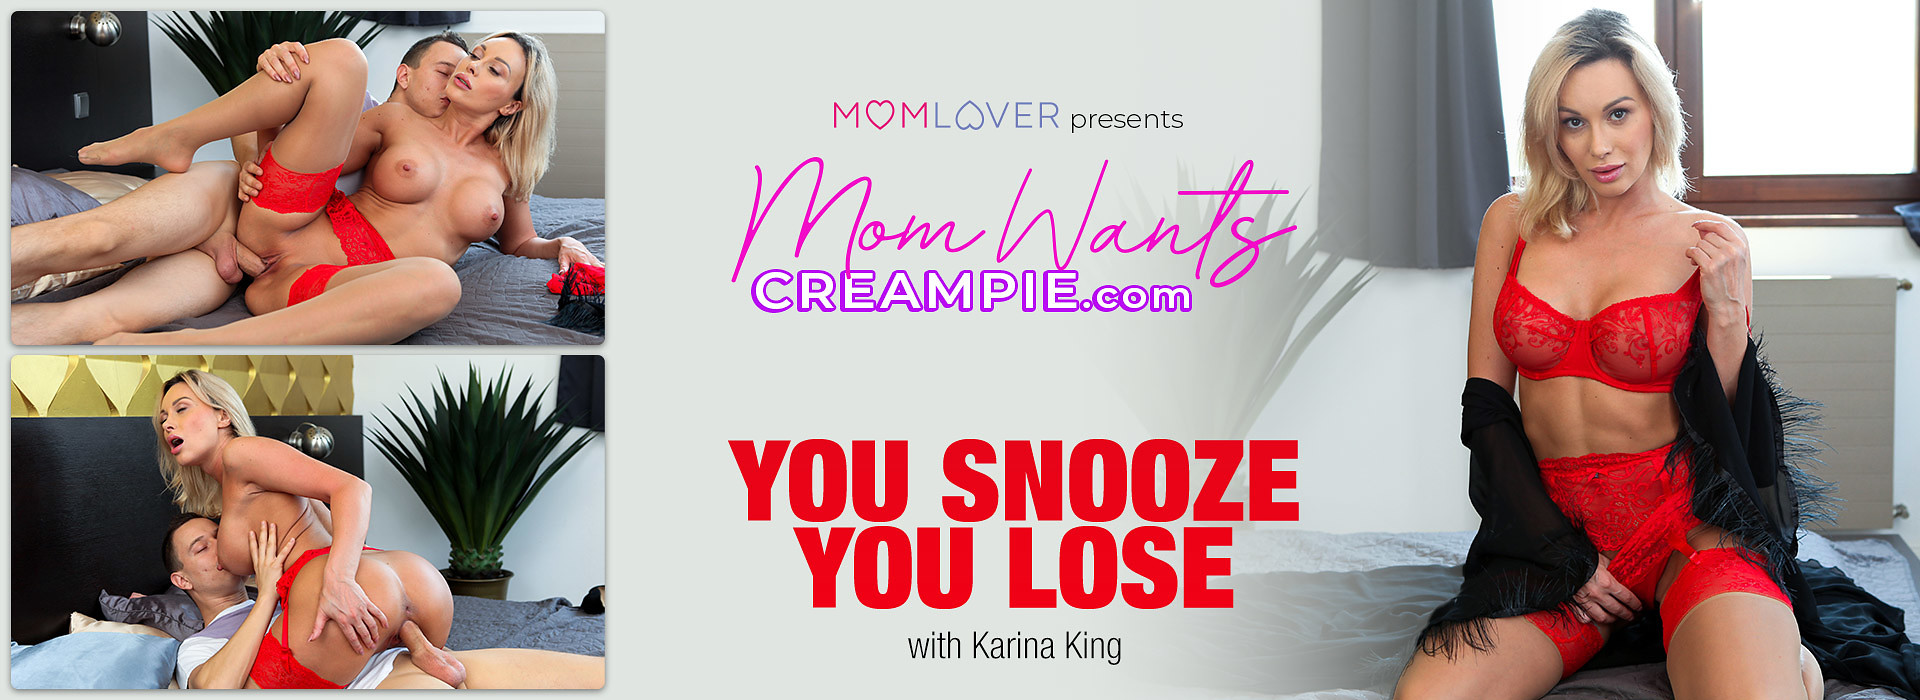 Stepmom Says You Snooze You Lose